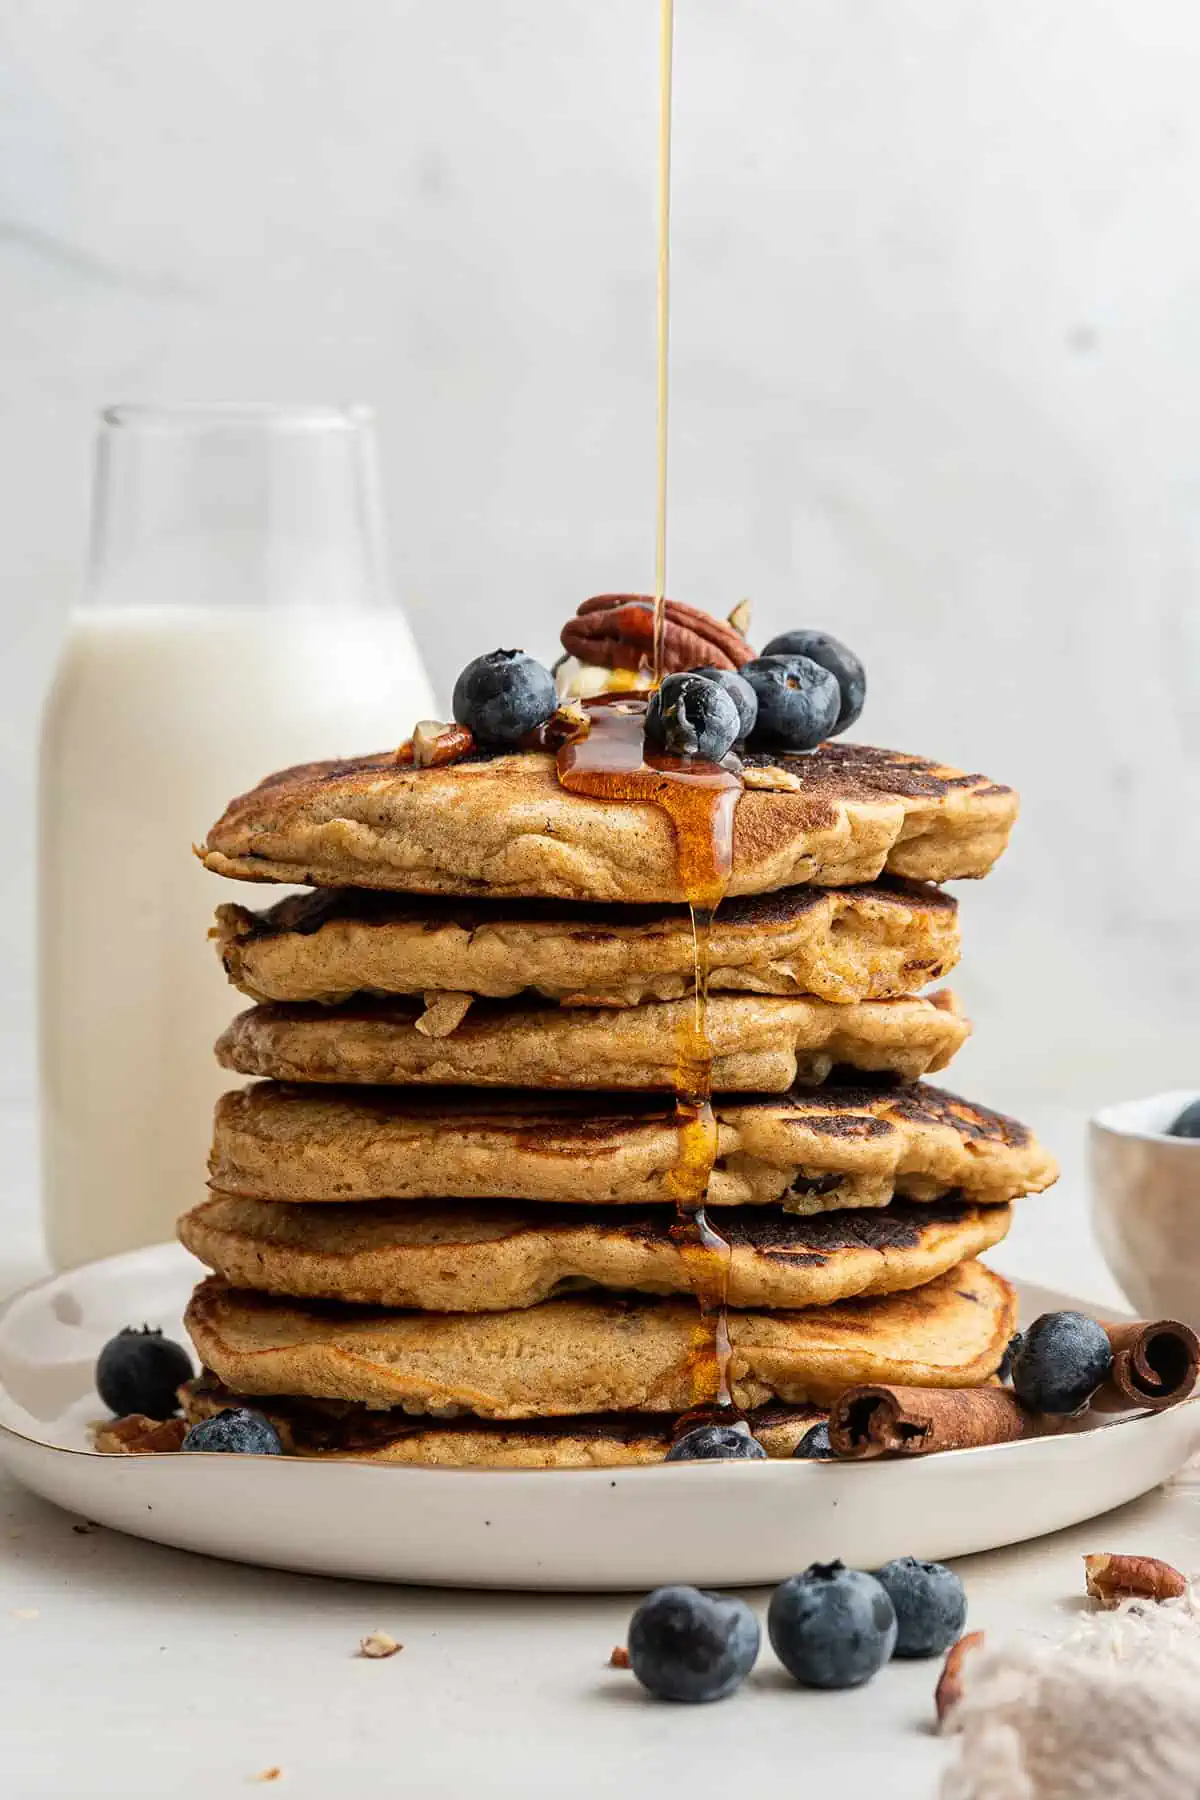 A stack of seven blueberry pancakes, topped with butter, blueberries, and a pecan, with maple syrup being drizzled over it, and a bottle of milk in the background